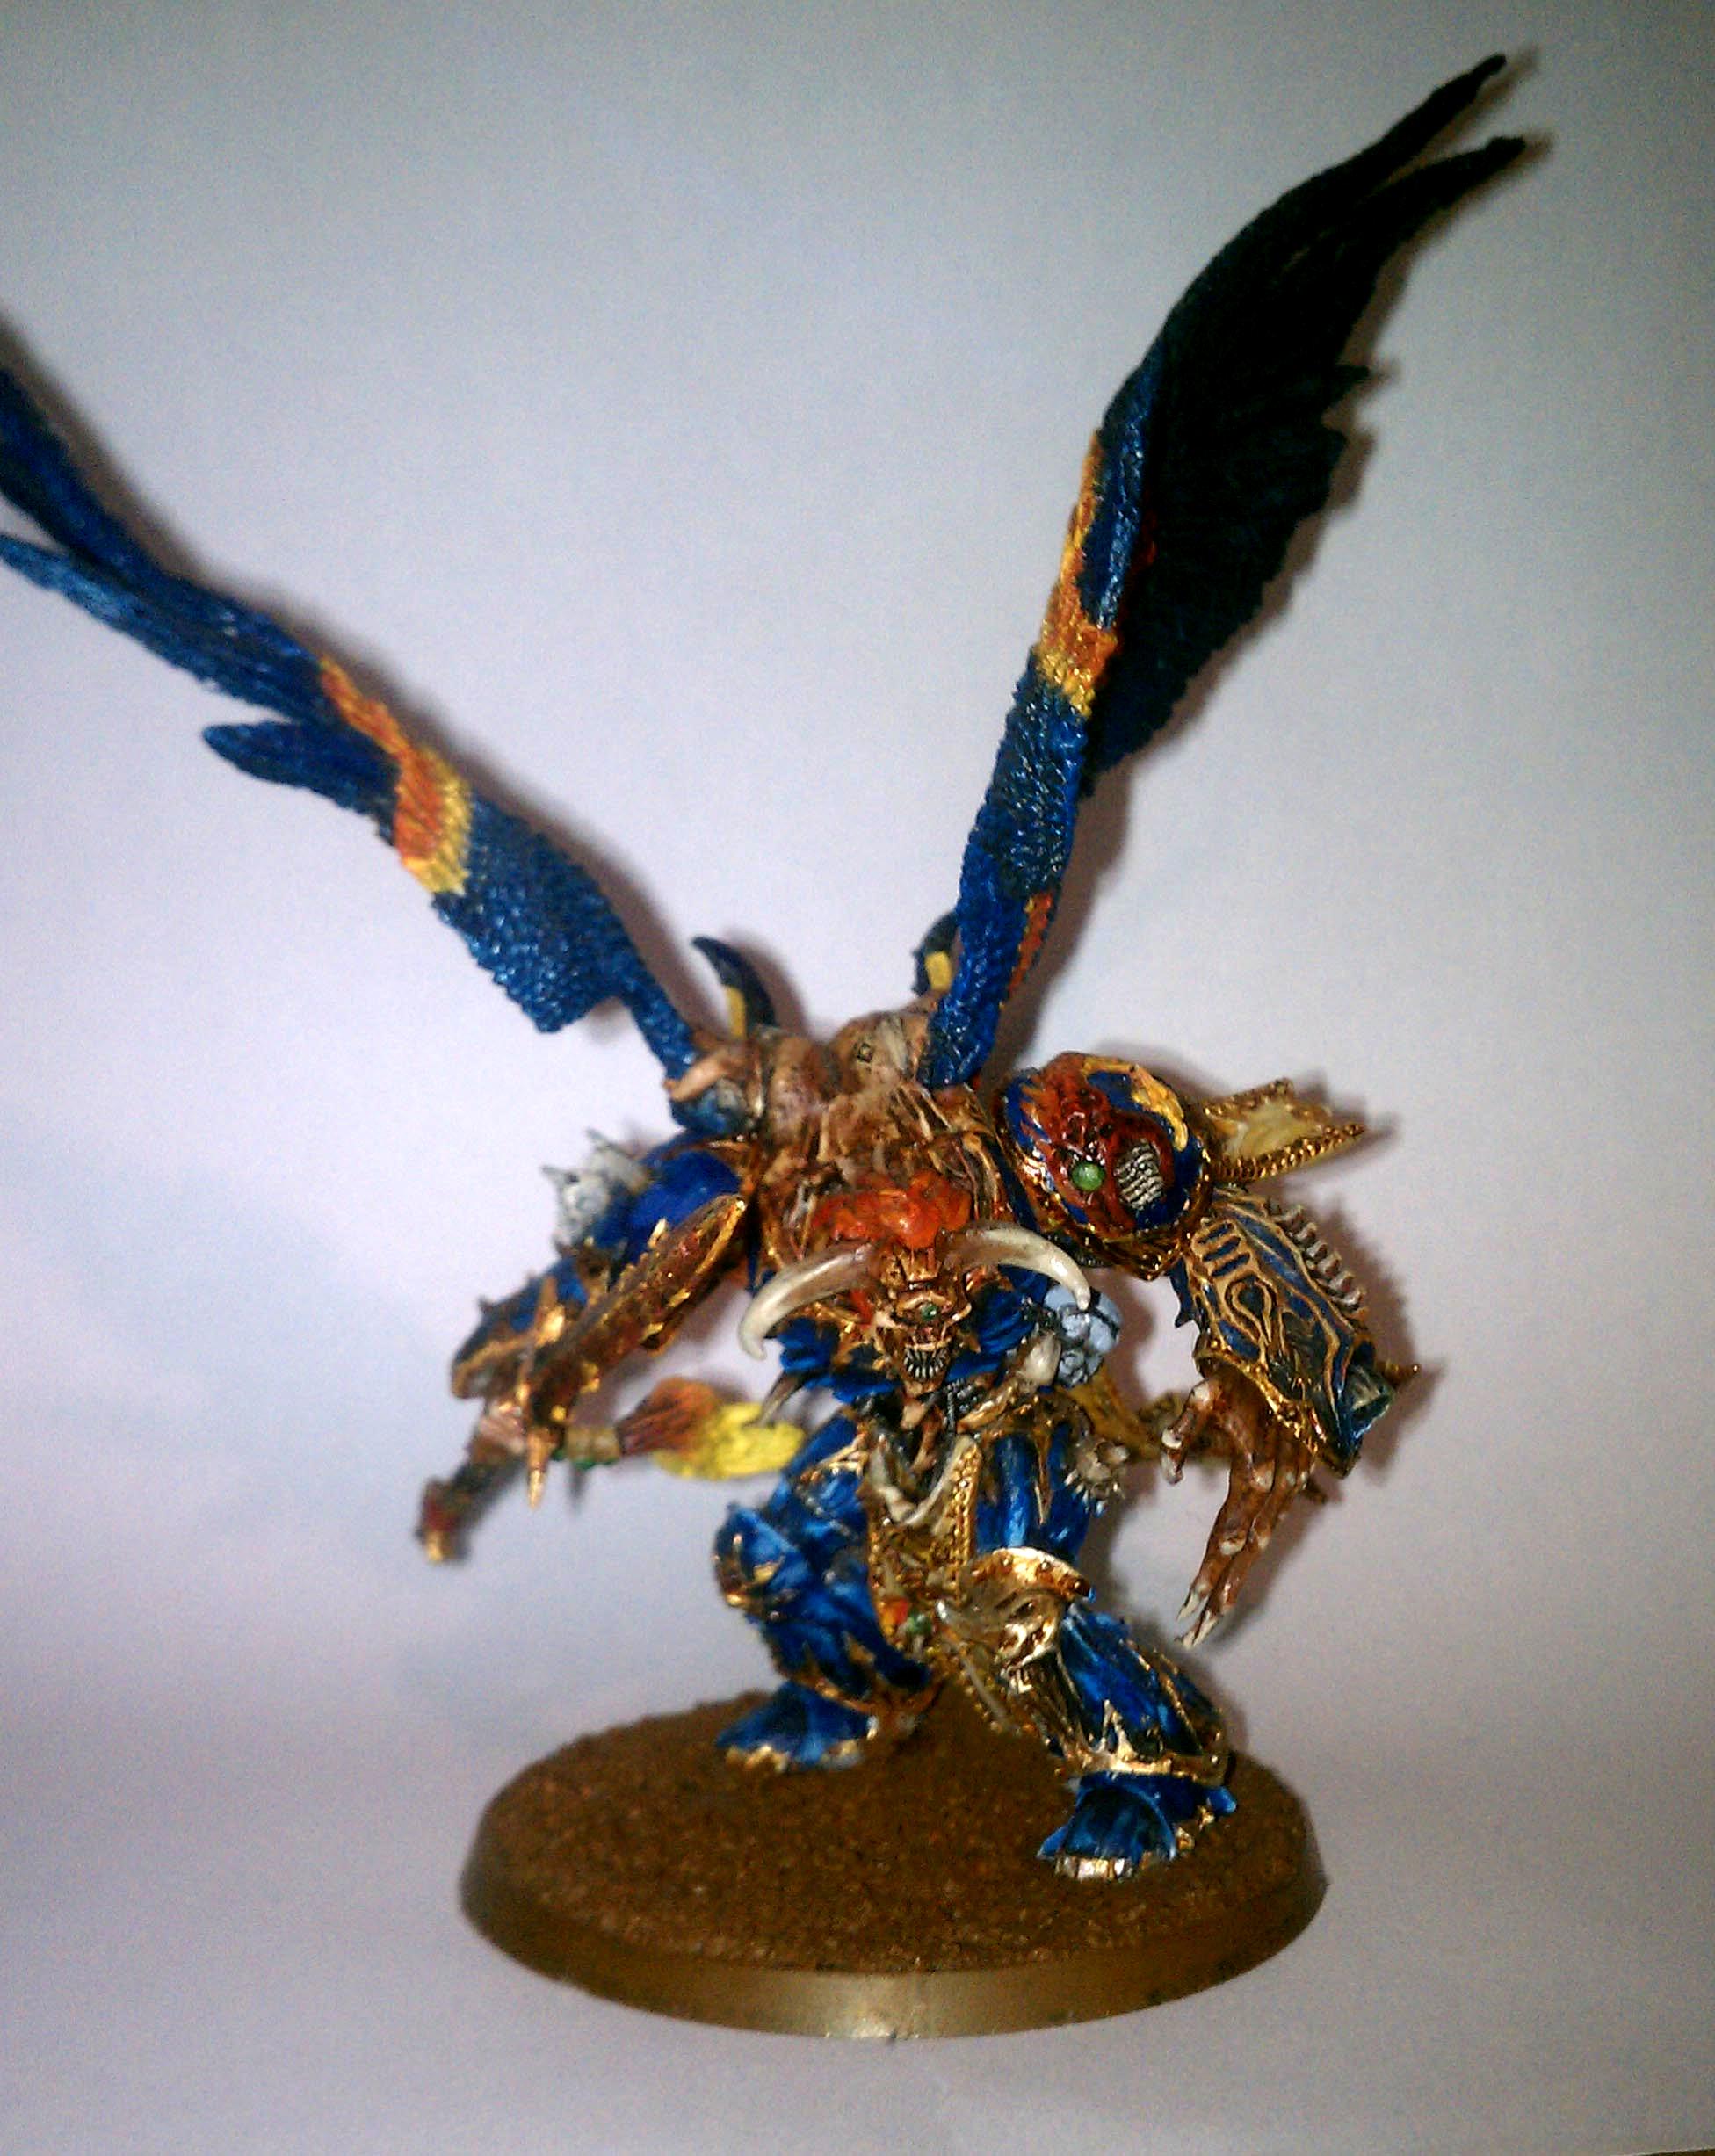 Chaos Daemons, Chaos Space Marines, Conversion, Daemon Prince, Daemons, Magnus The Red, Thousand Sons, Tzeentch